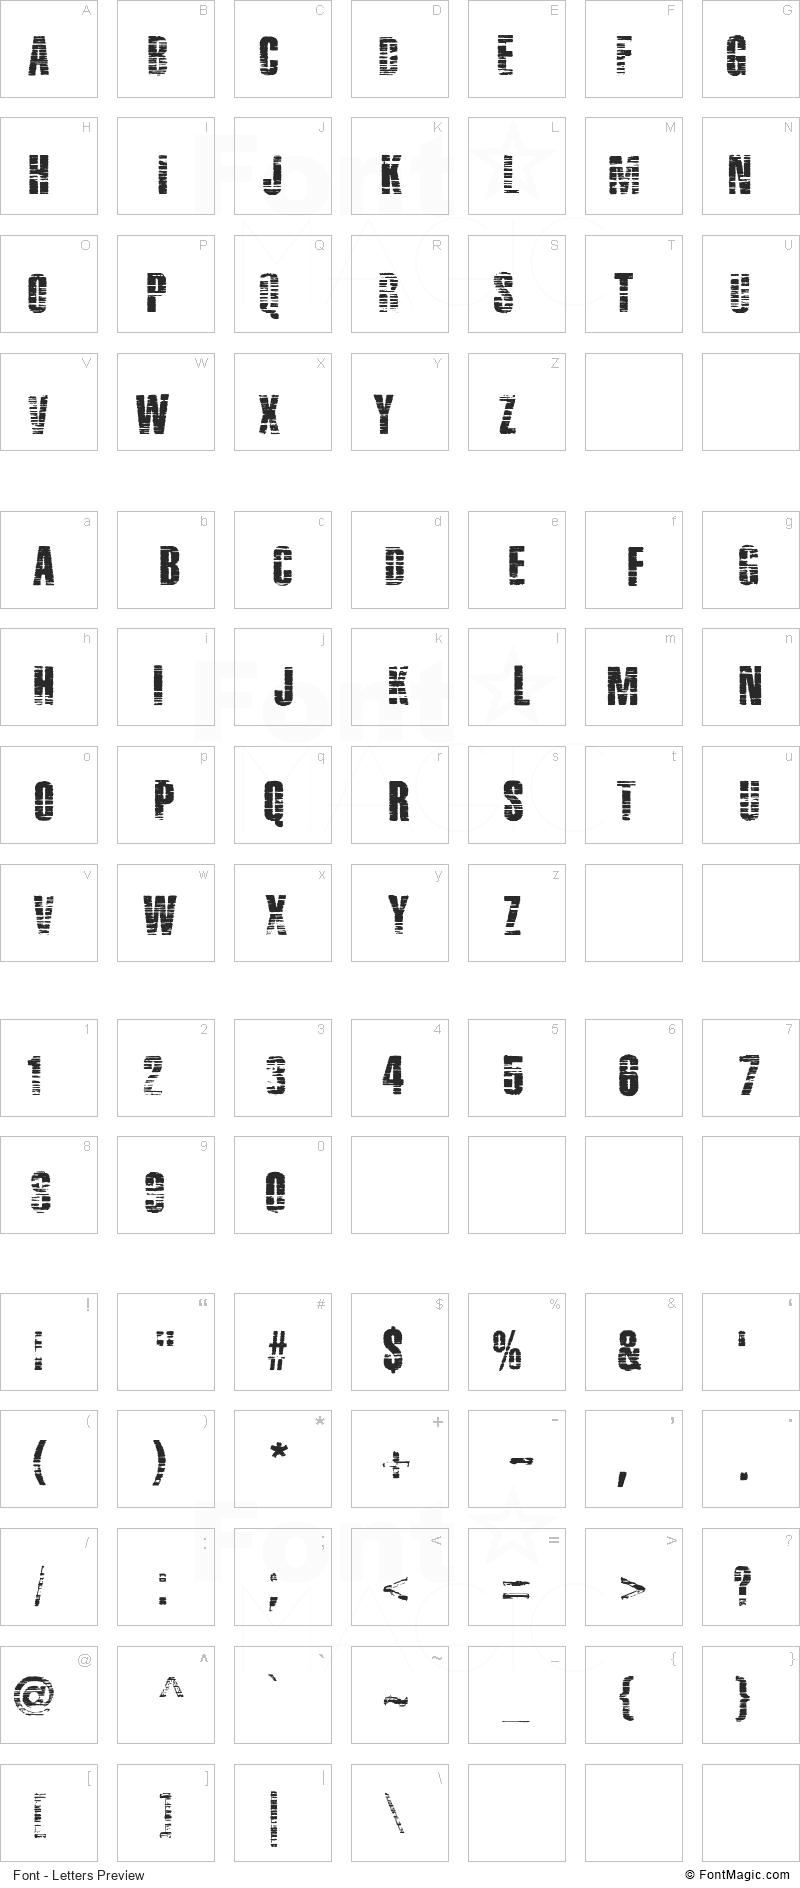 Mentha Rapture Font - All Latters Preview Chart